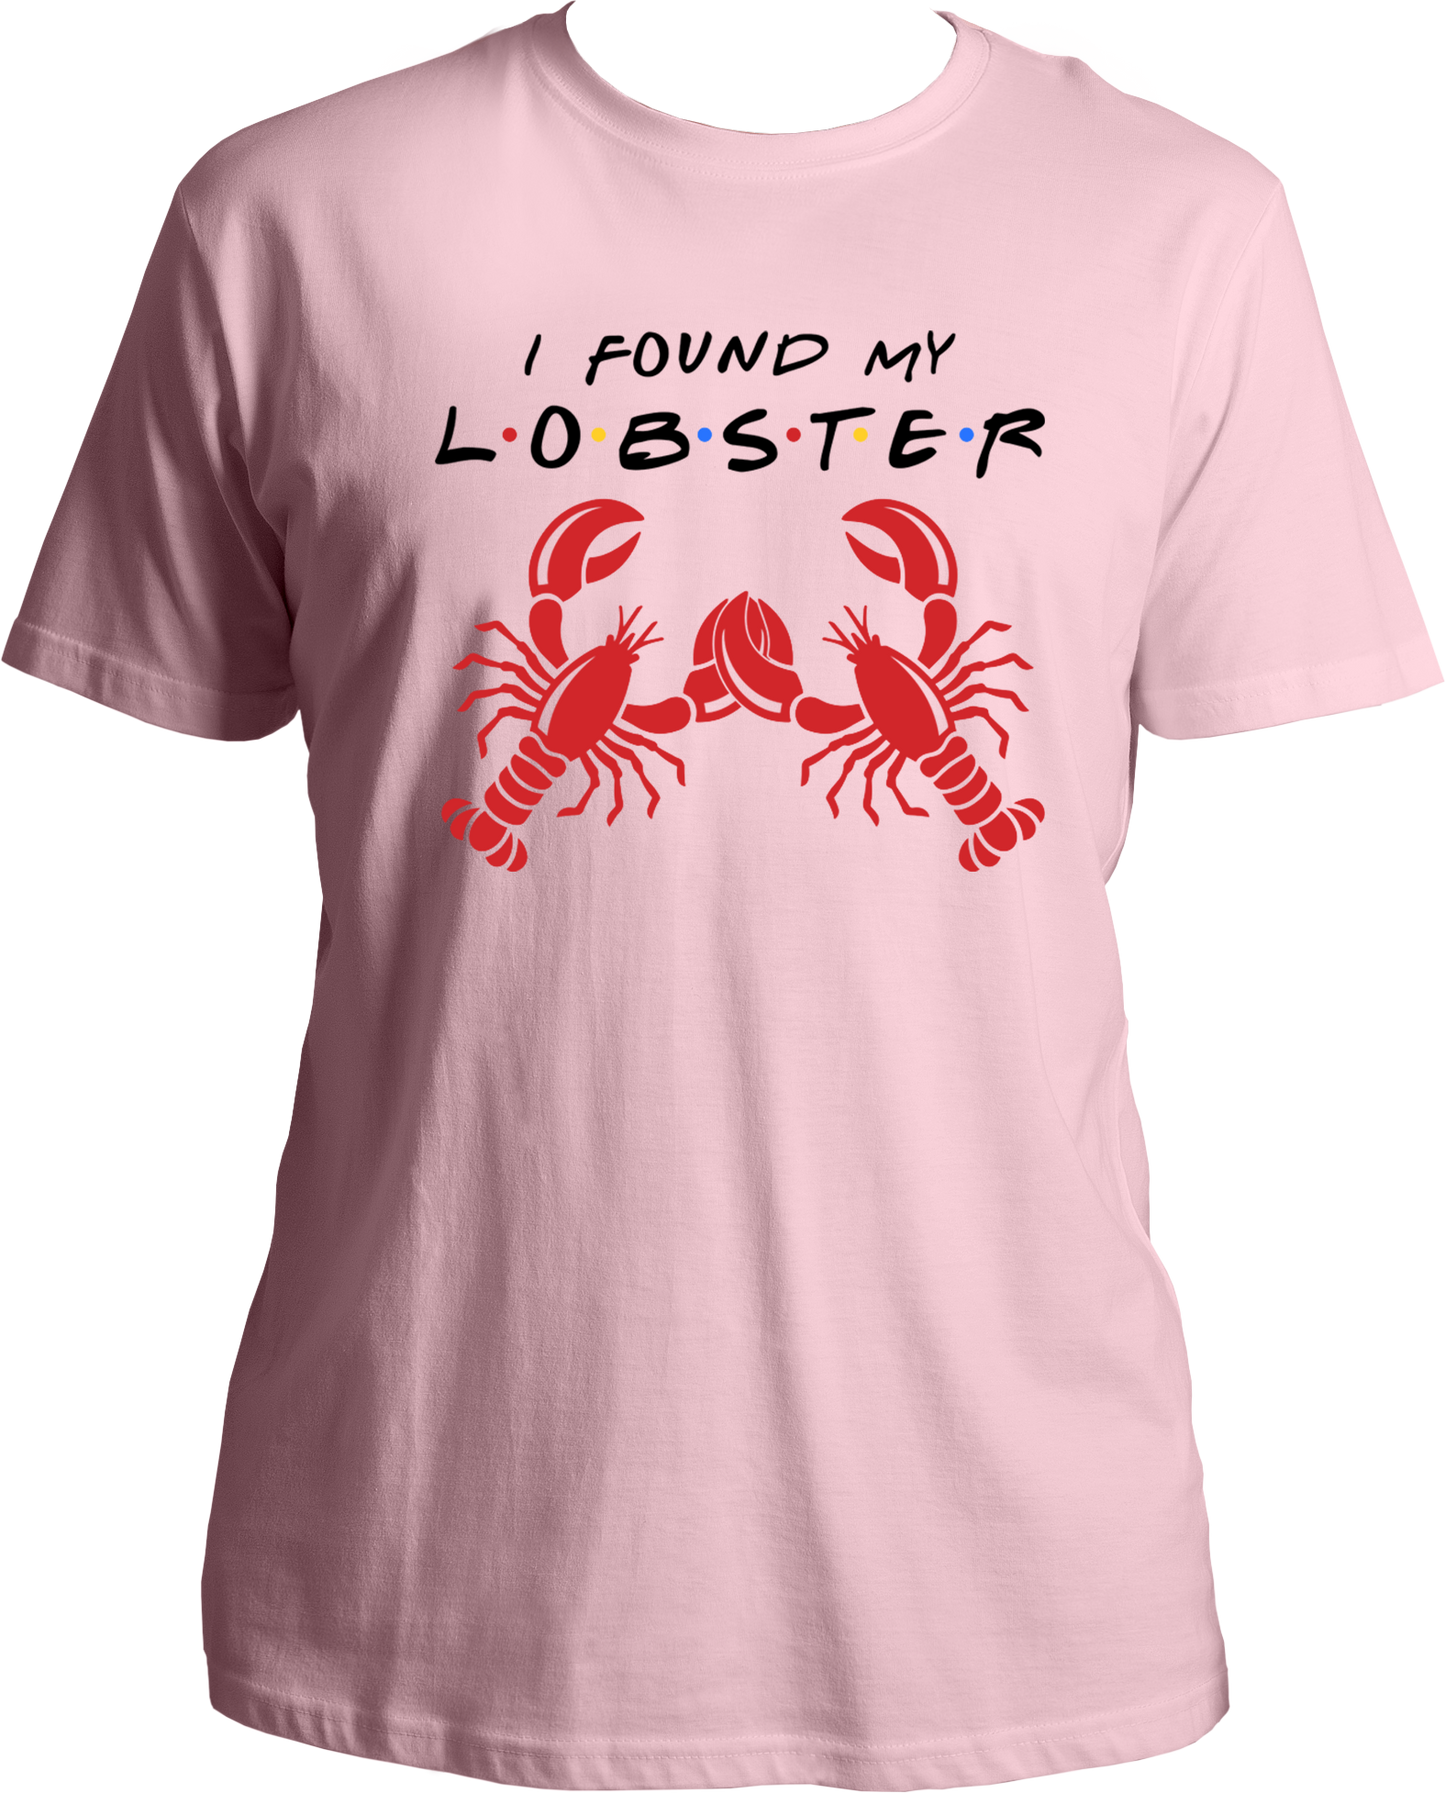 Become a true fan of the ultimate cult classic comedy show Friends with these I Found My Lobster Unisex T-Shirts! Made of pure cotton for a comfortable fit, these shirts are perfect for die hard fans who want to show off their love for the show. Get yours now and join the Friends frenzy!